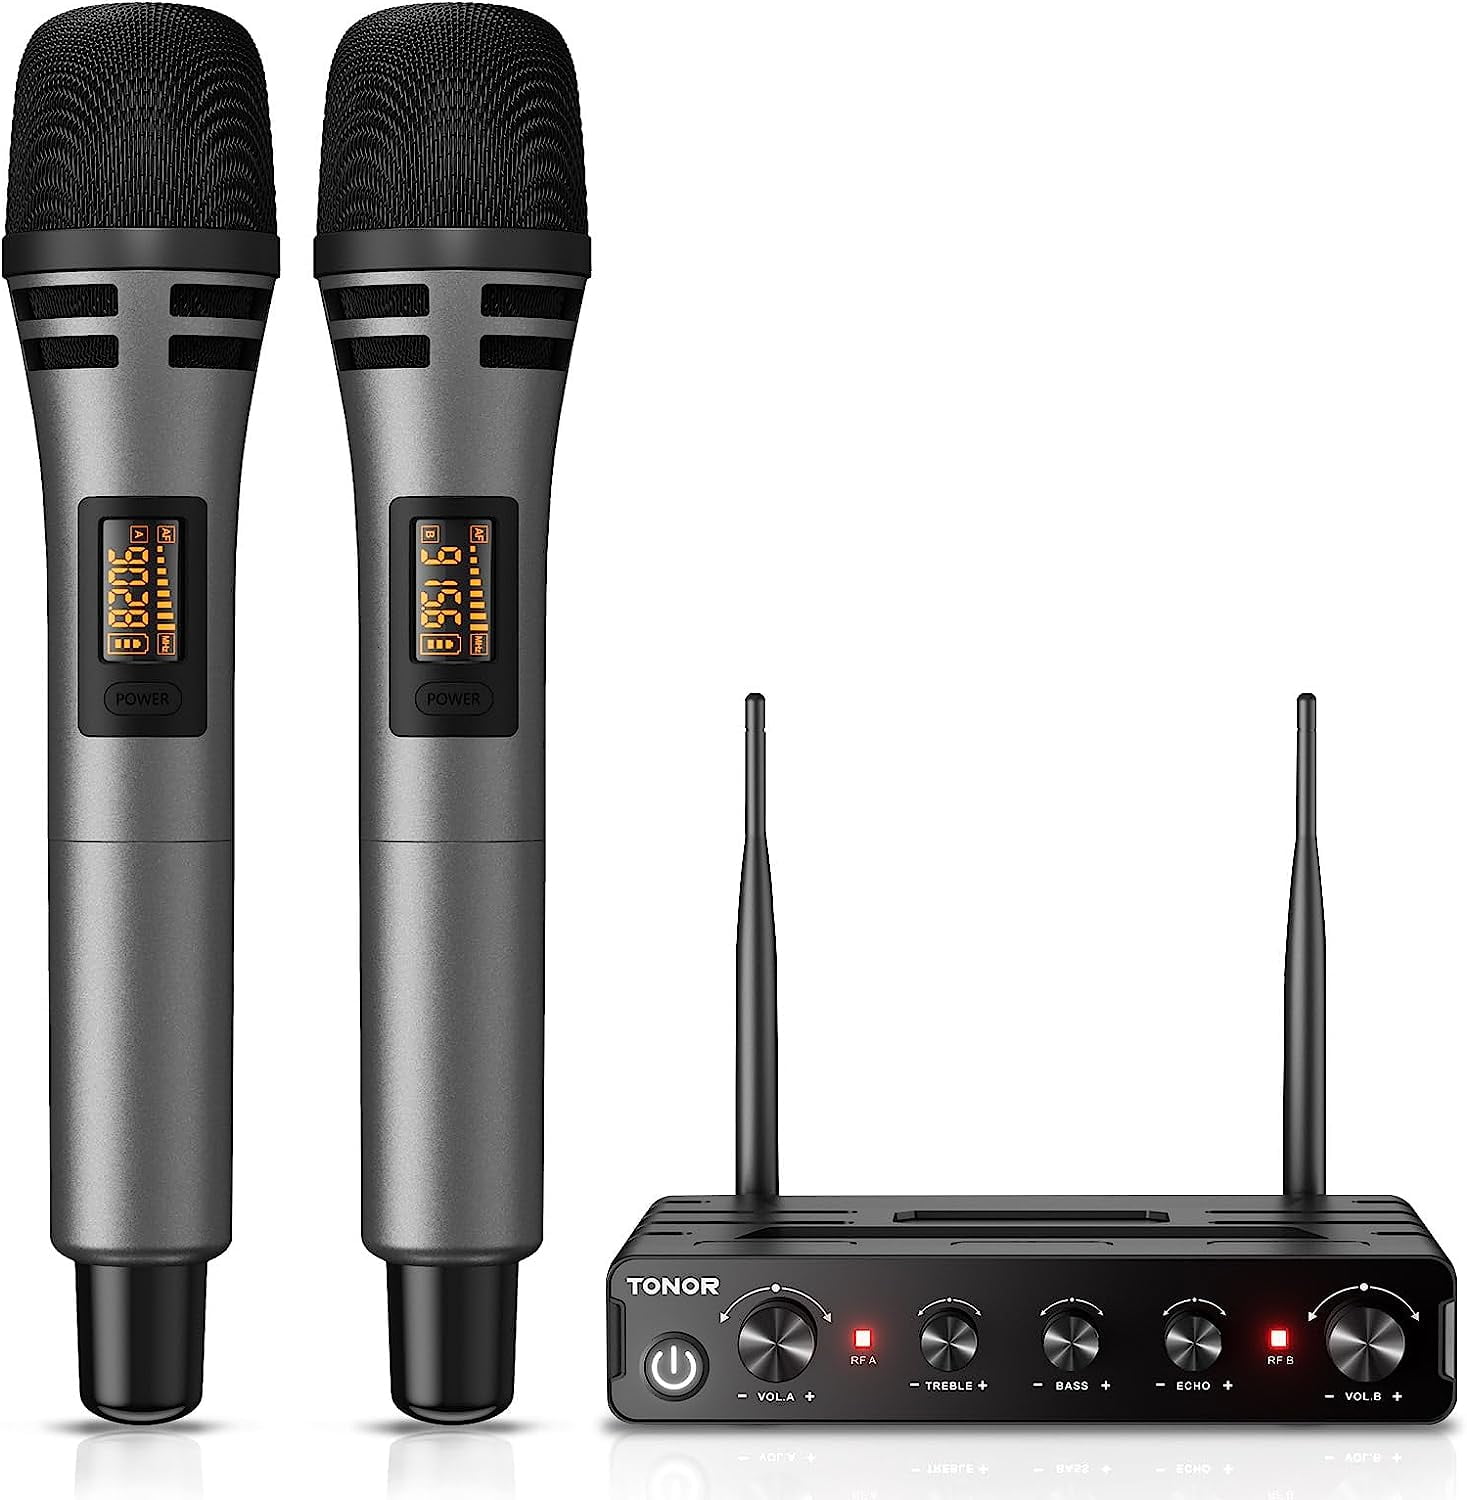 Wireless Microphone Systems, TONOR Professional Dual UHF Cordless